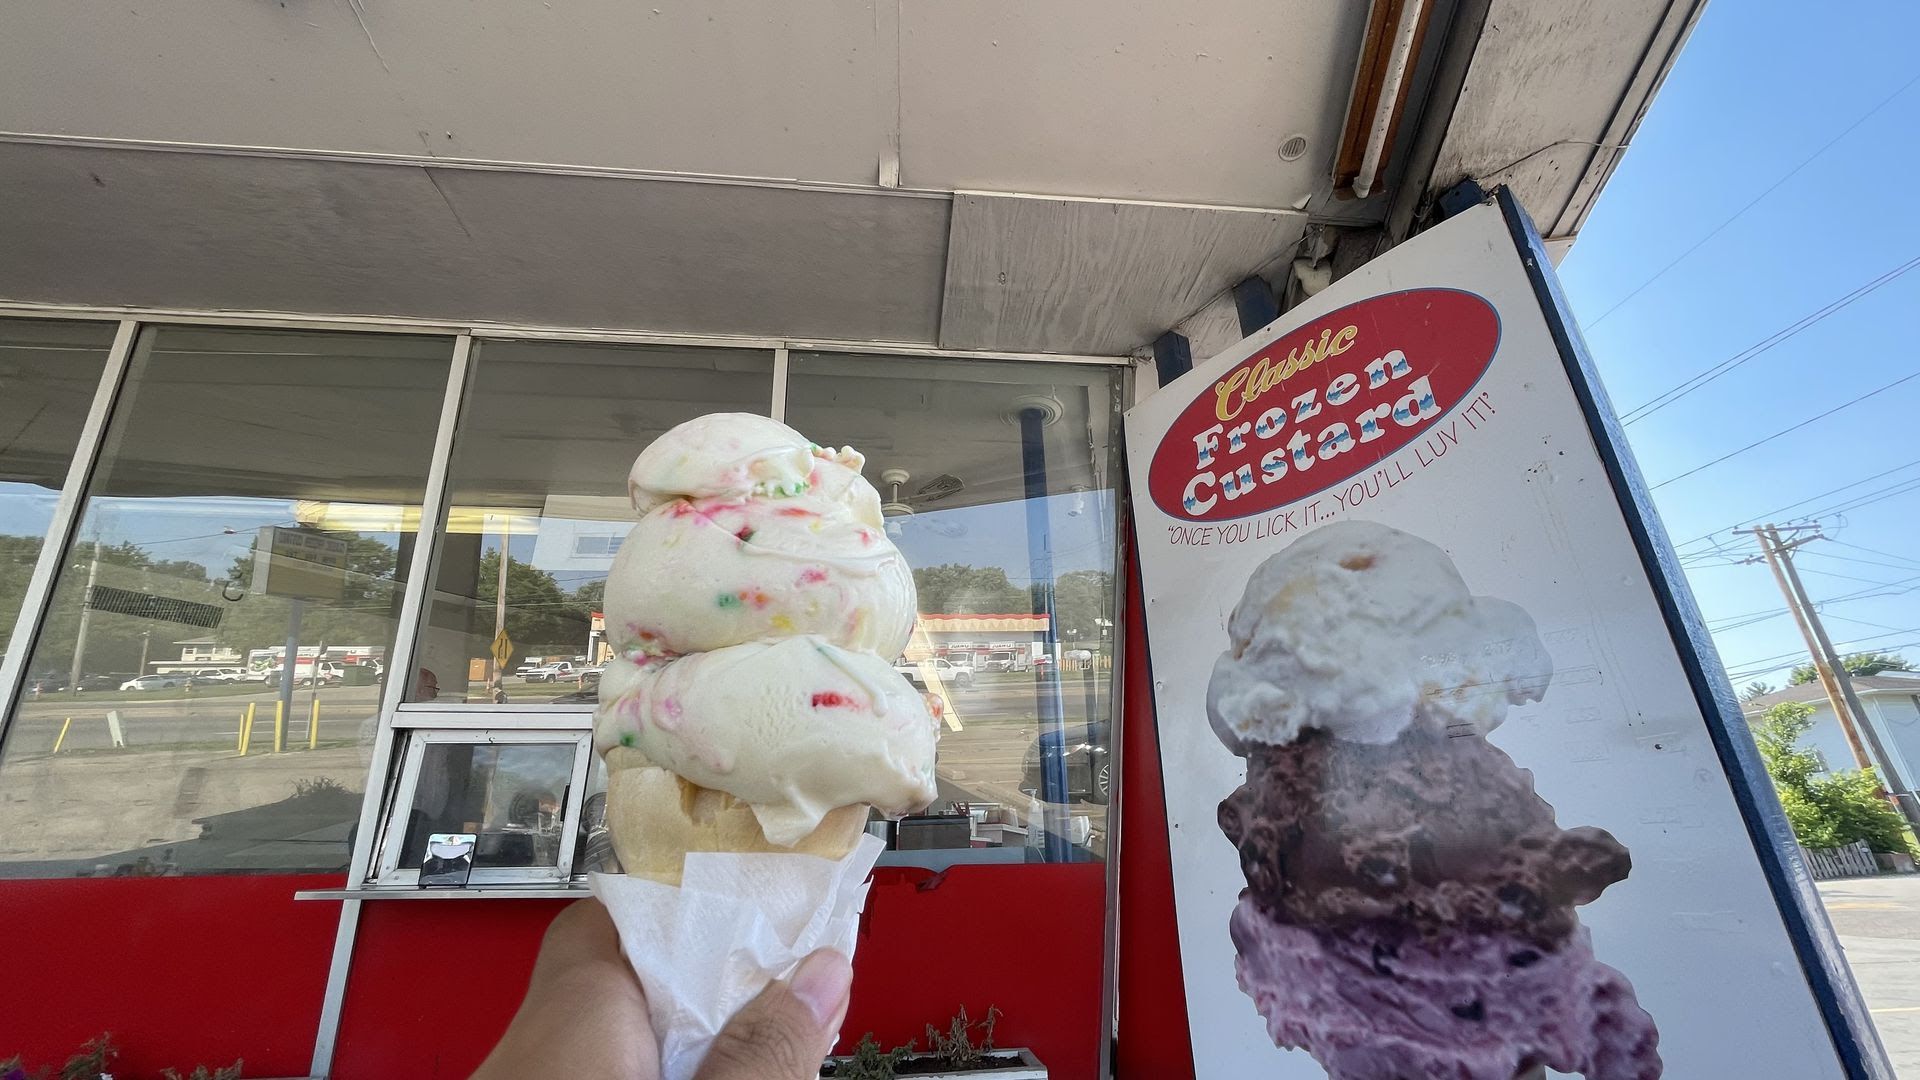 Three scoops of birthday cake ice cream on a cone held up next to a Classic Frozen Custard sign.